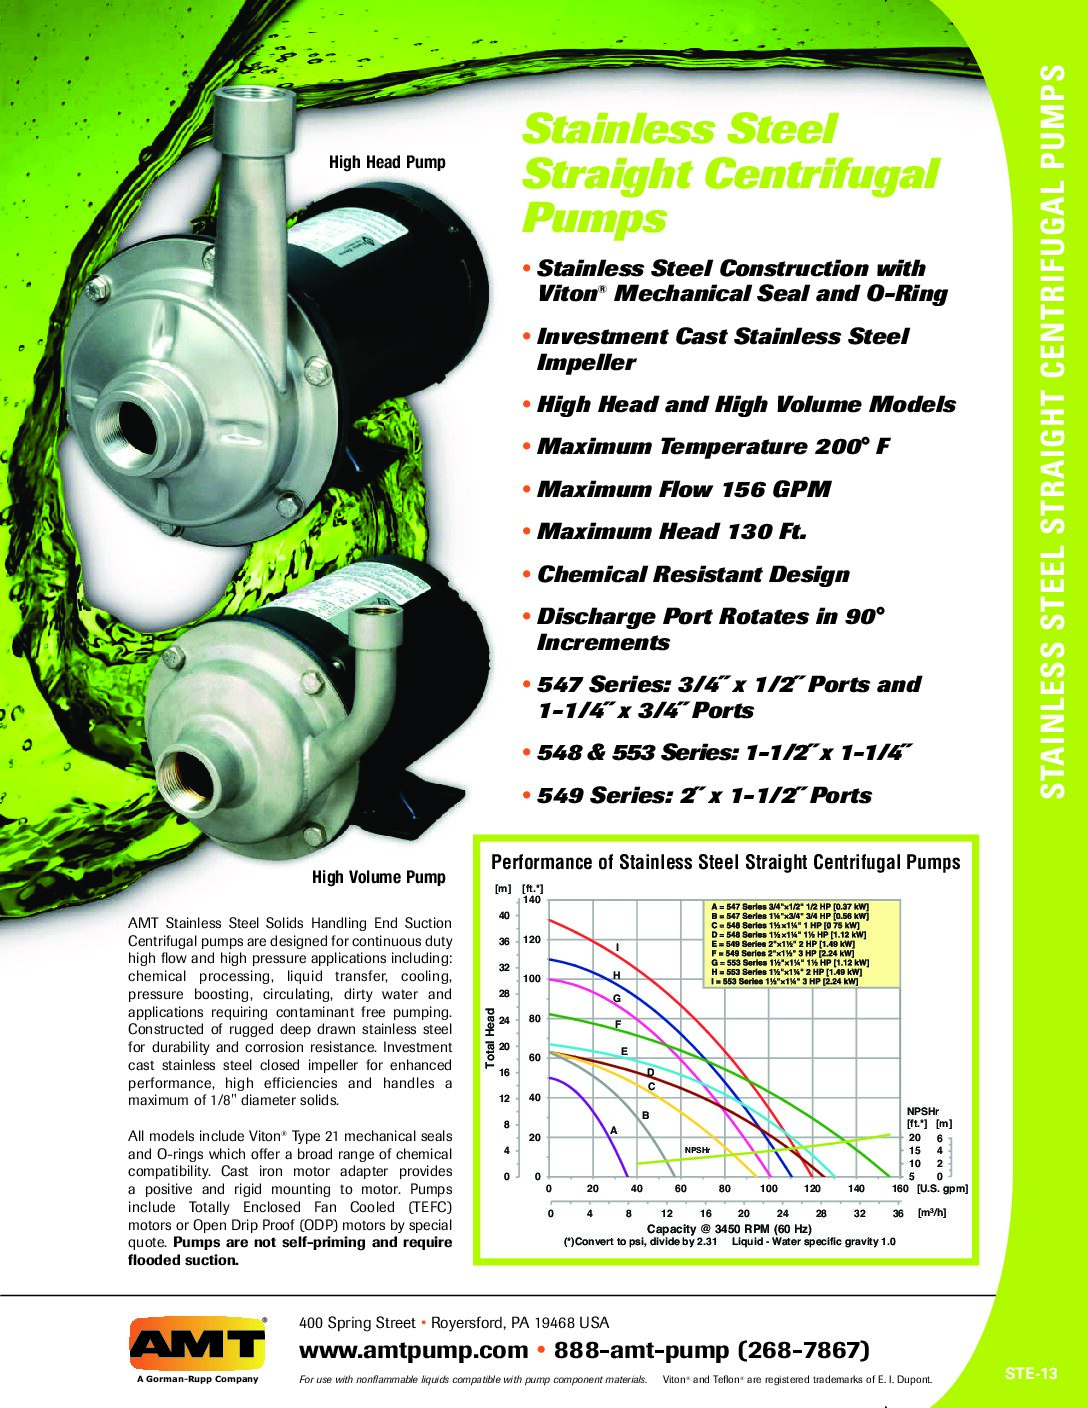 AMT Stainless Steel Straight Centrifugal Pumps